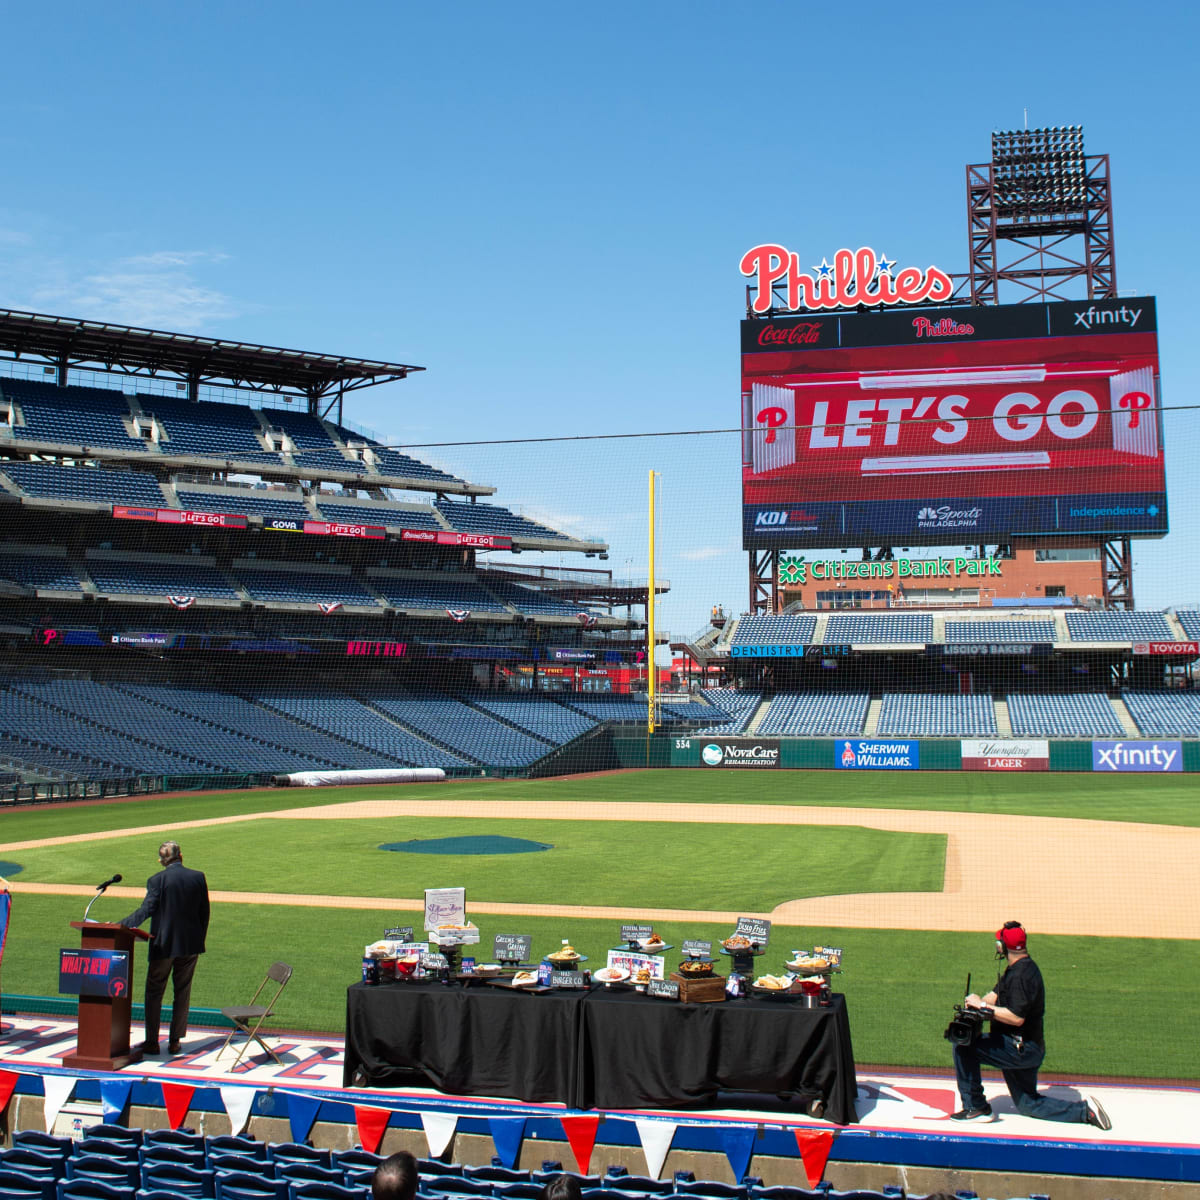 New Ballpark Features Debuting At Phillies Home Opener Friday